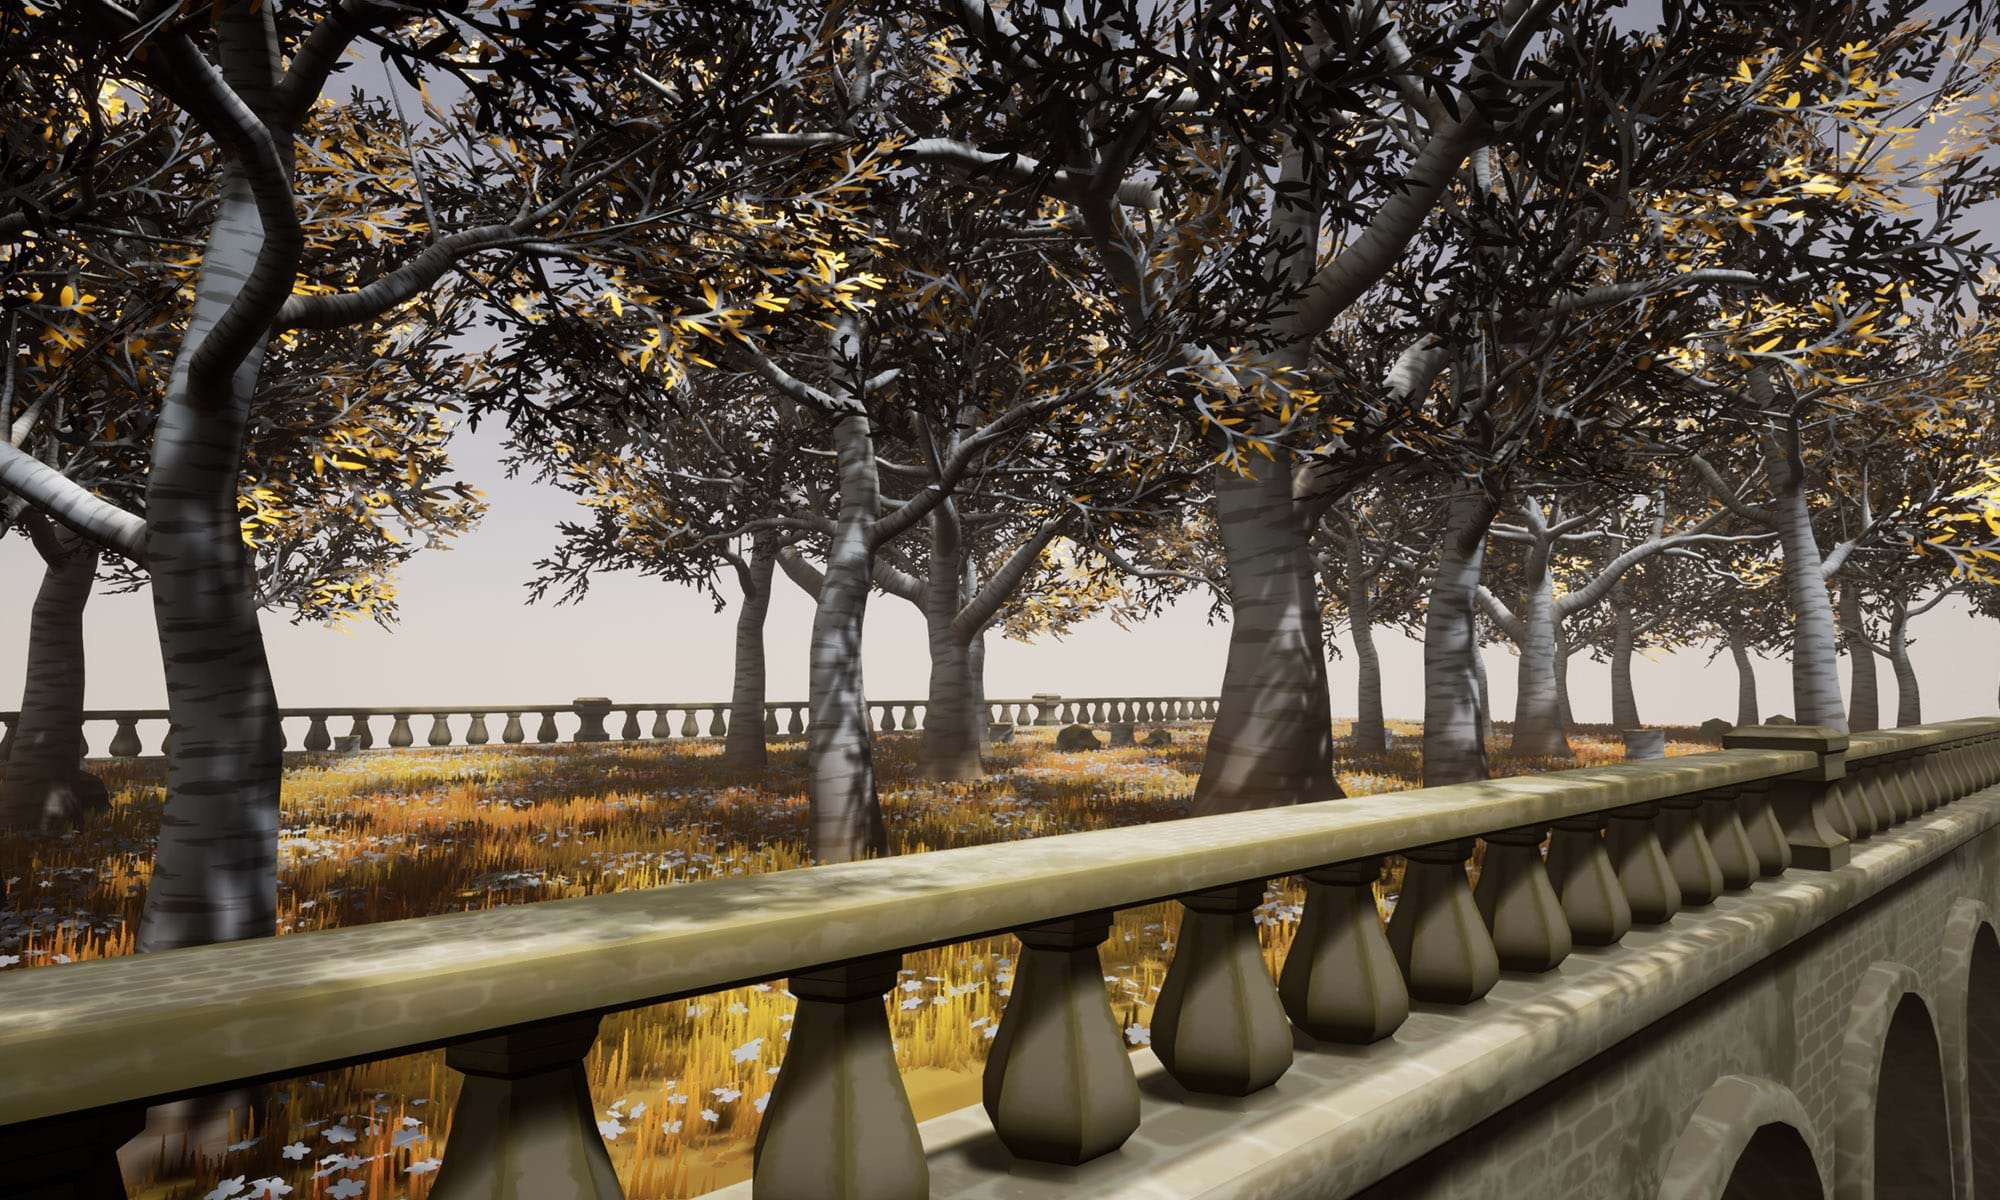 'Limbo's Bridge - An Applicative Study of Foliage in Game Design' is a 2023 Digital Graduate Show project by Christopher Brown, a Games Design and Production student at Abertay University.